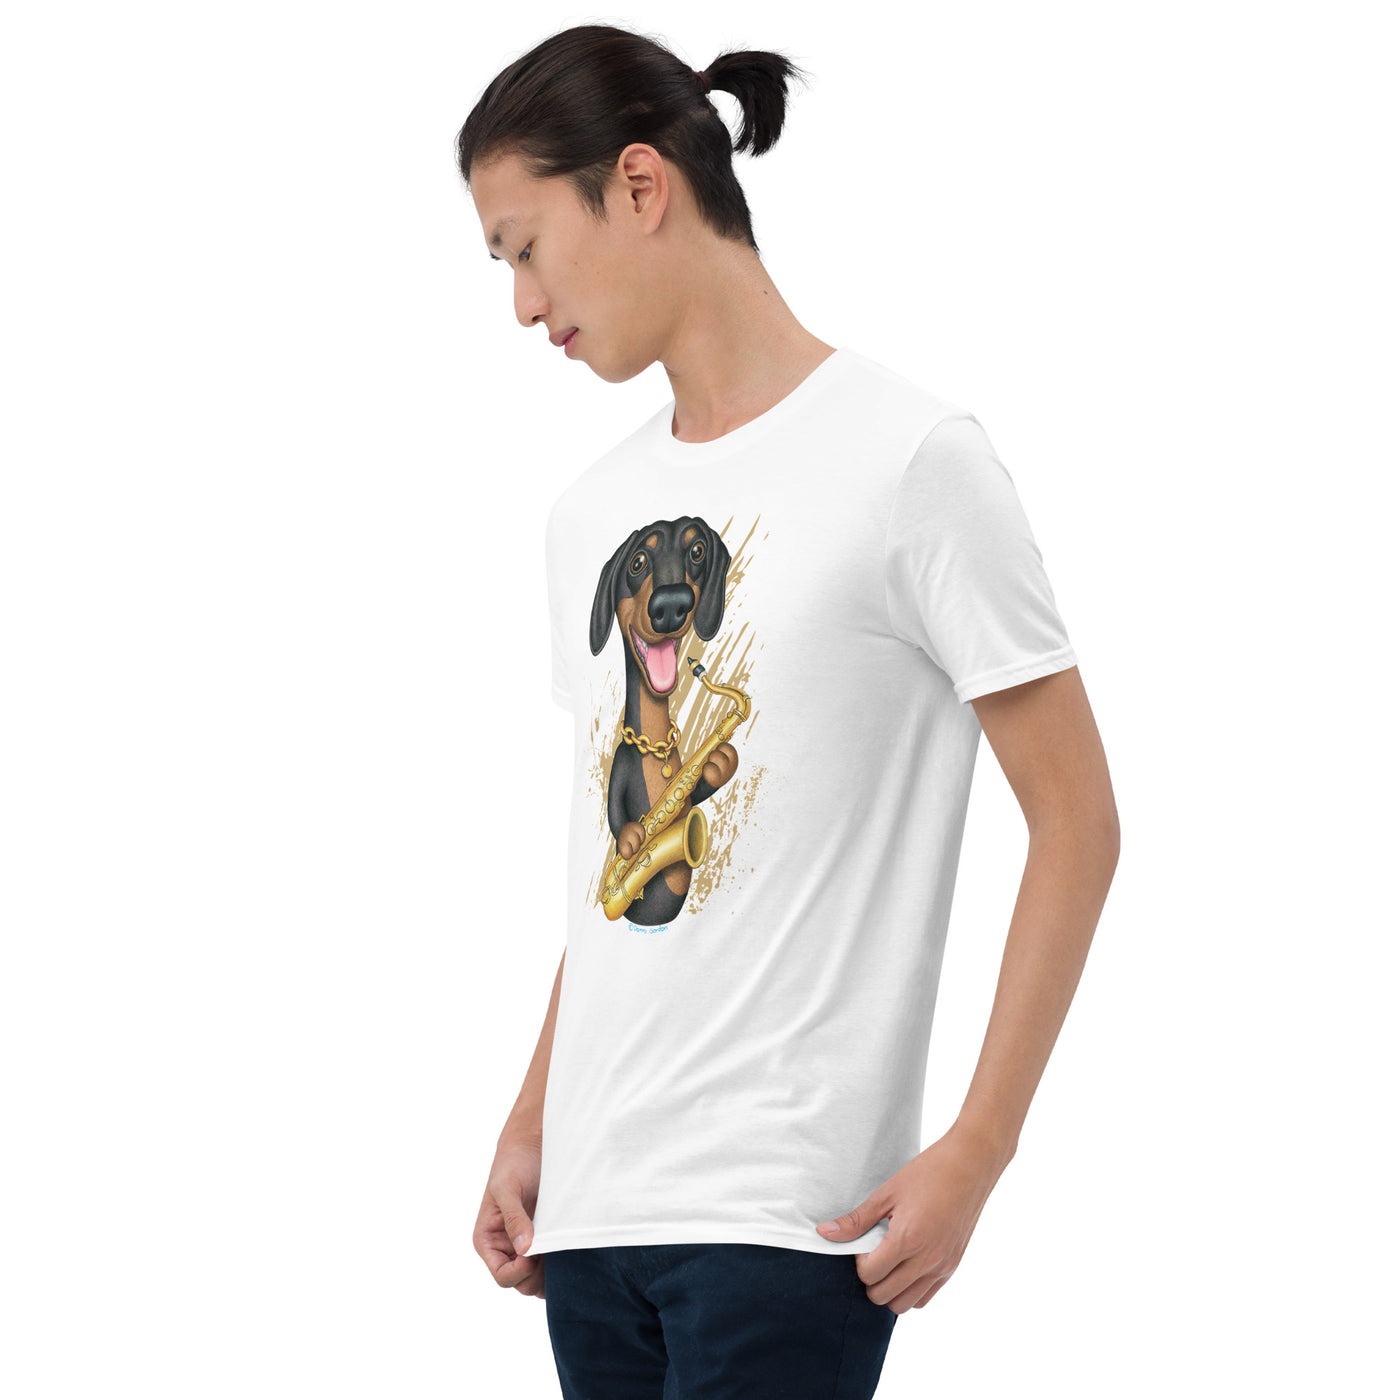 Doxie Dog with a Saxophone on a funny and cute  Dachshund Unisex T-Shirt